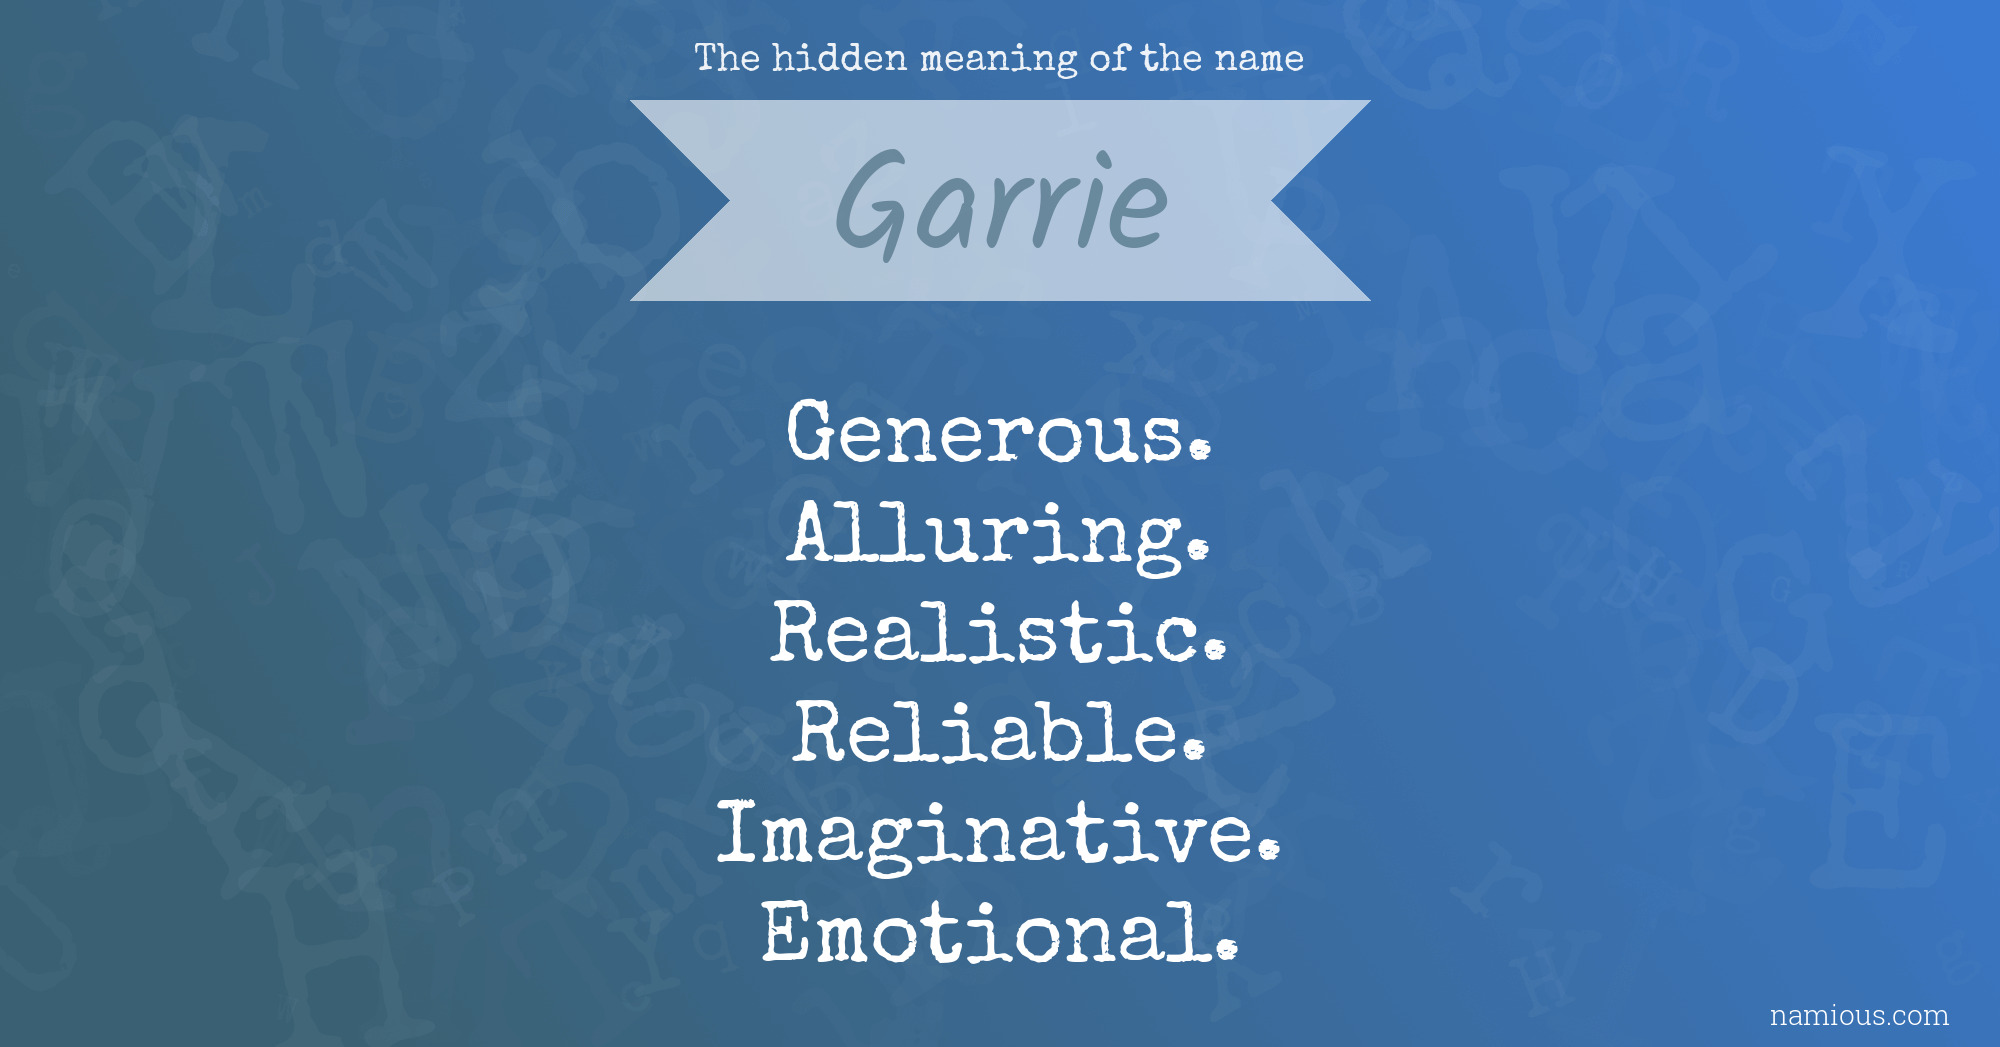 The hidden meaning of the name Garrie